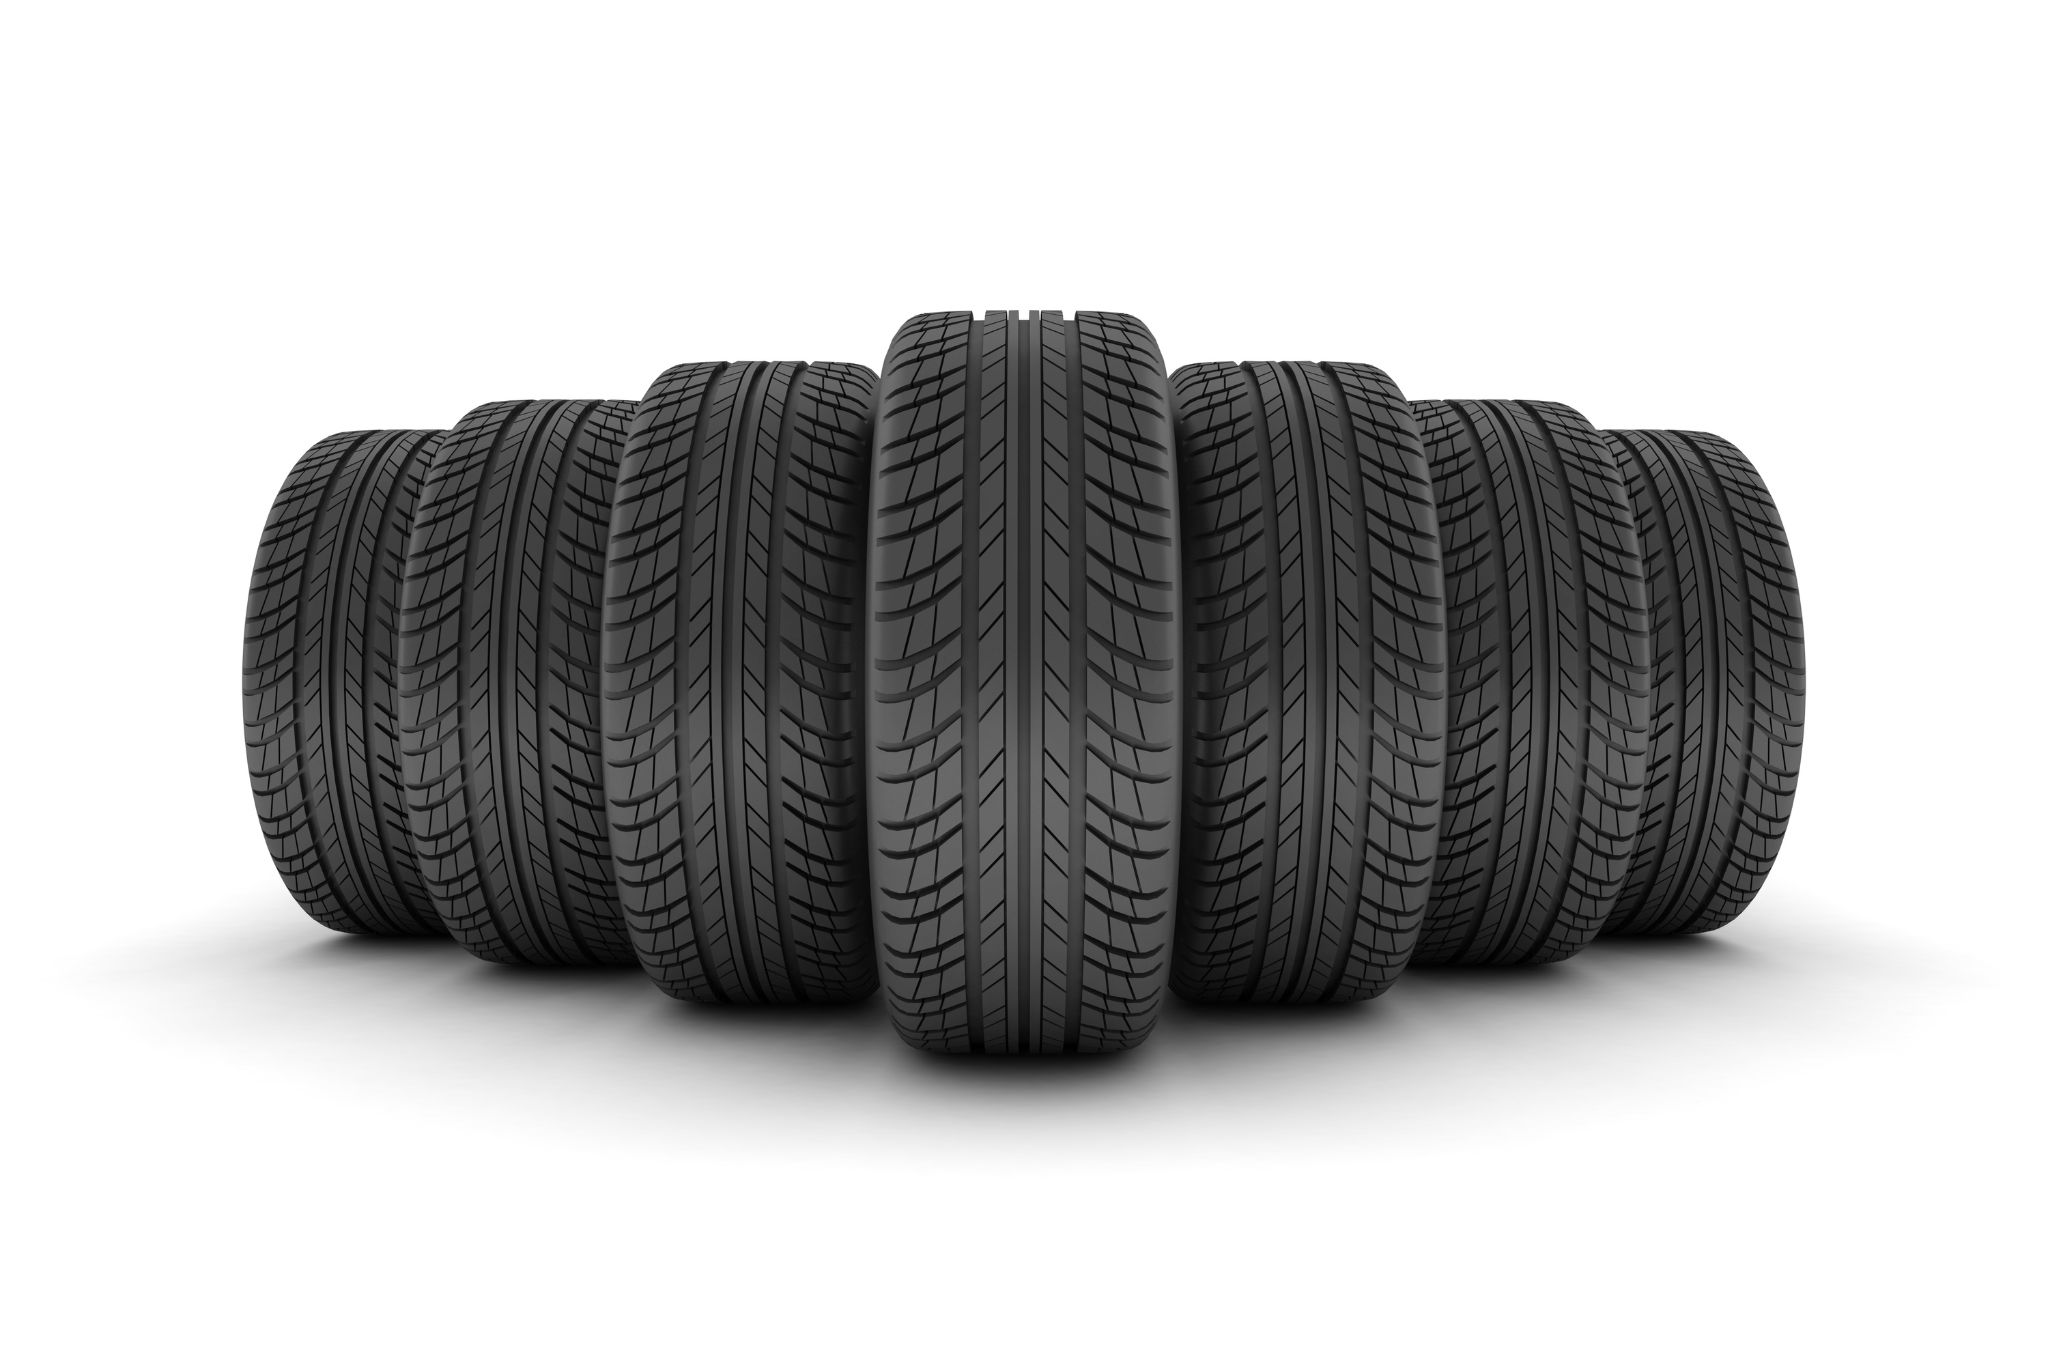 Can Uneven Tire Wear Cause Vibration?